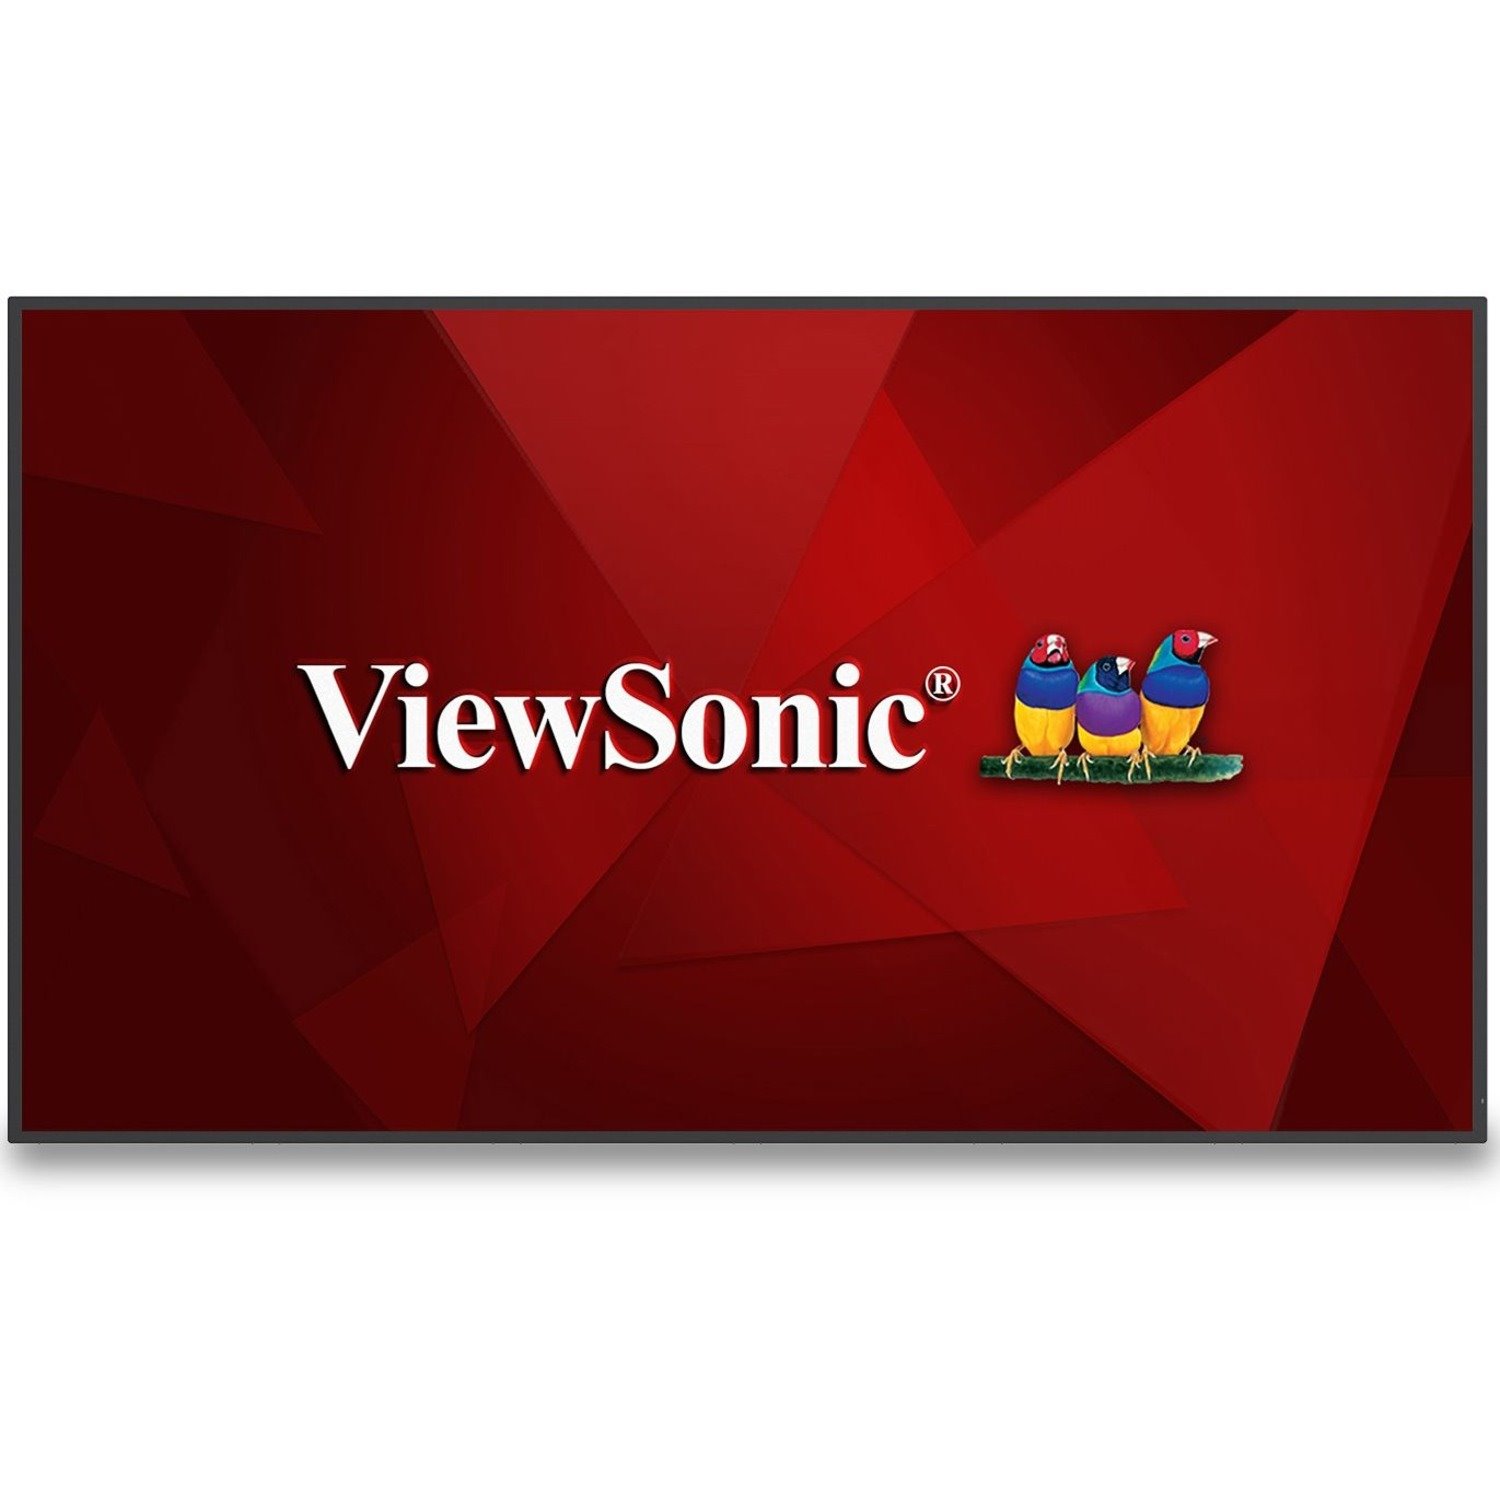 ViewSonic CDE8630 86" 4K UHD Wireless Presentation Display 24/7 Commercial Display with Portrait Landscape, USB C, Wifi/BT Slot, RJ45 and RS232